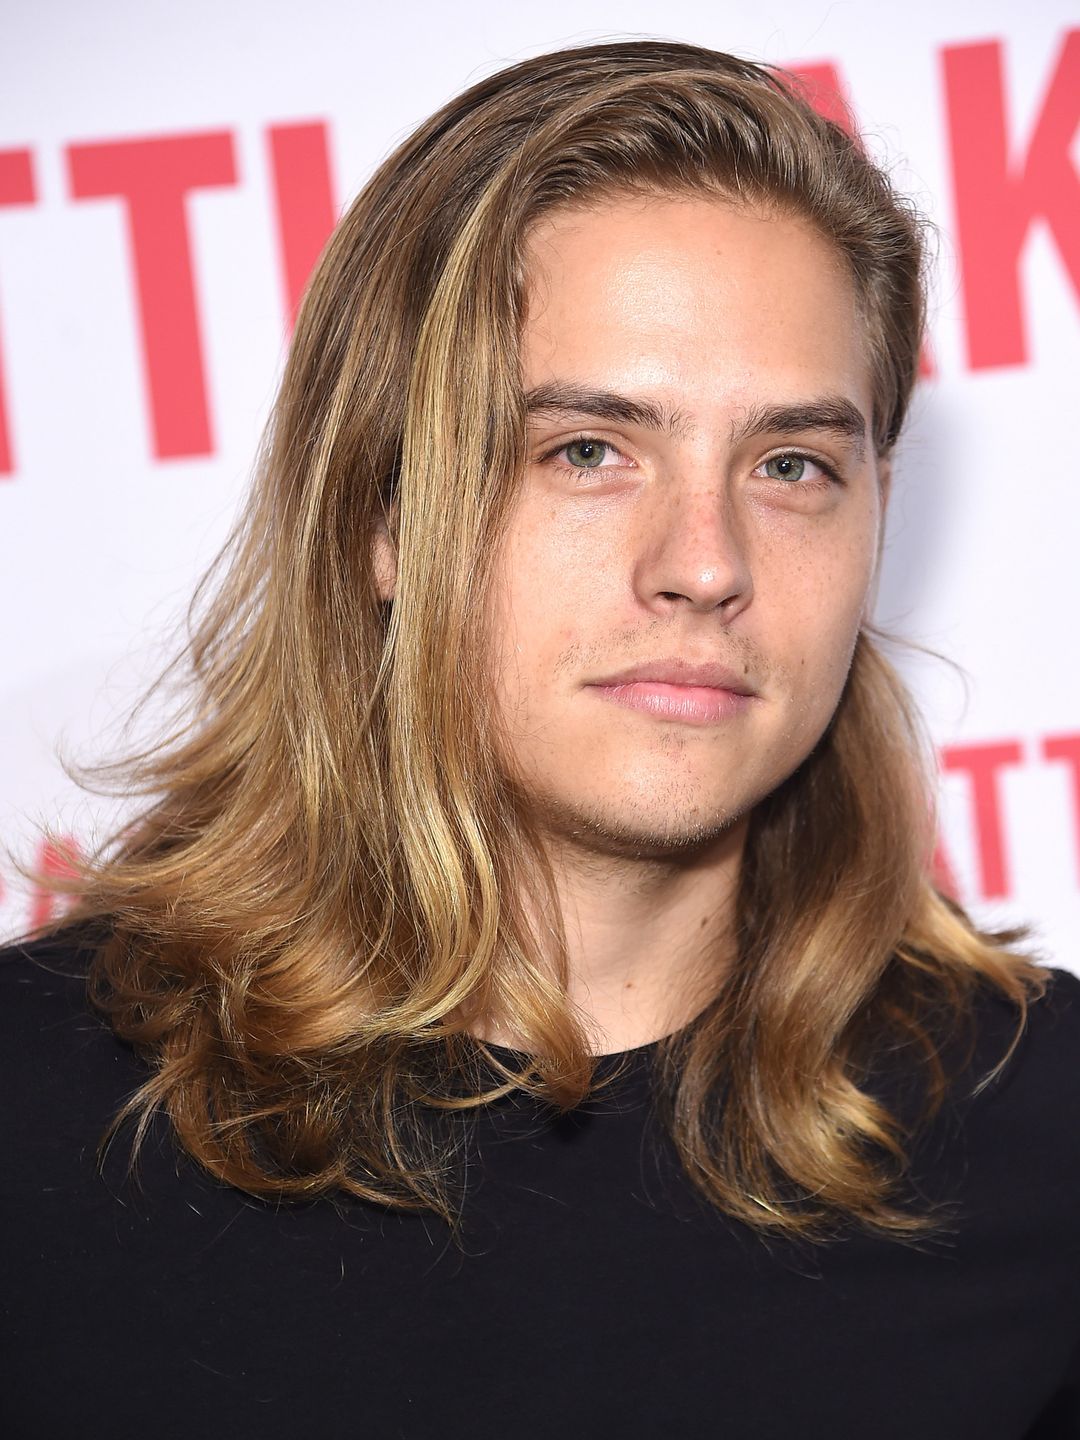 Dylan Sprouse personal traits